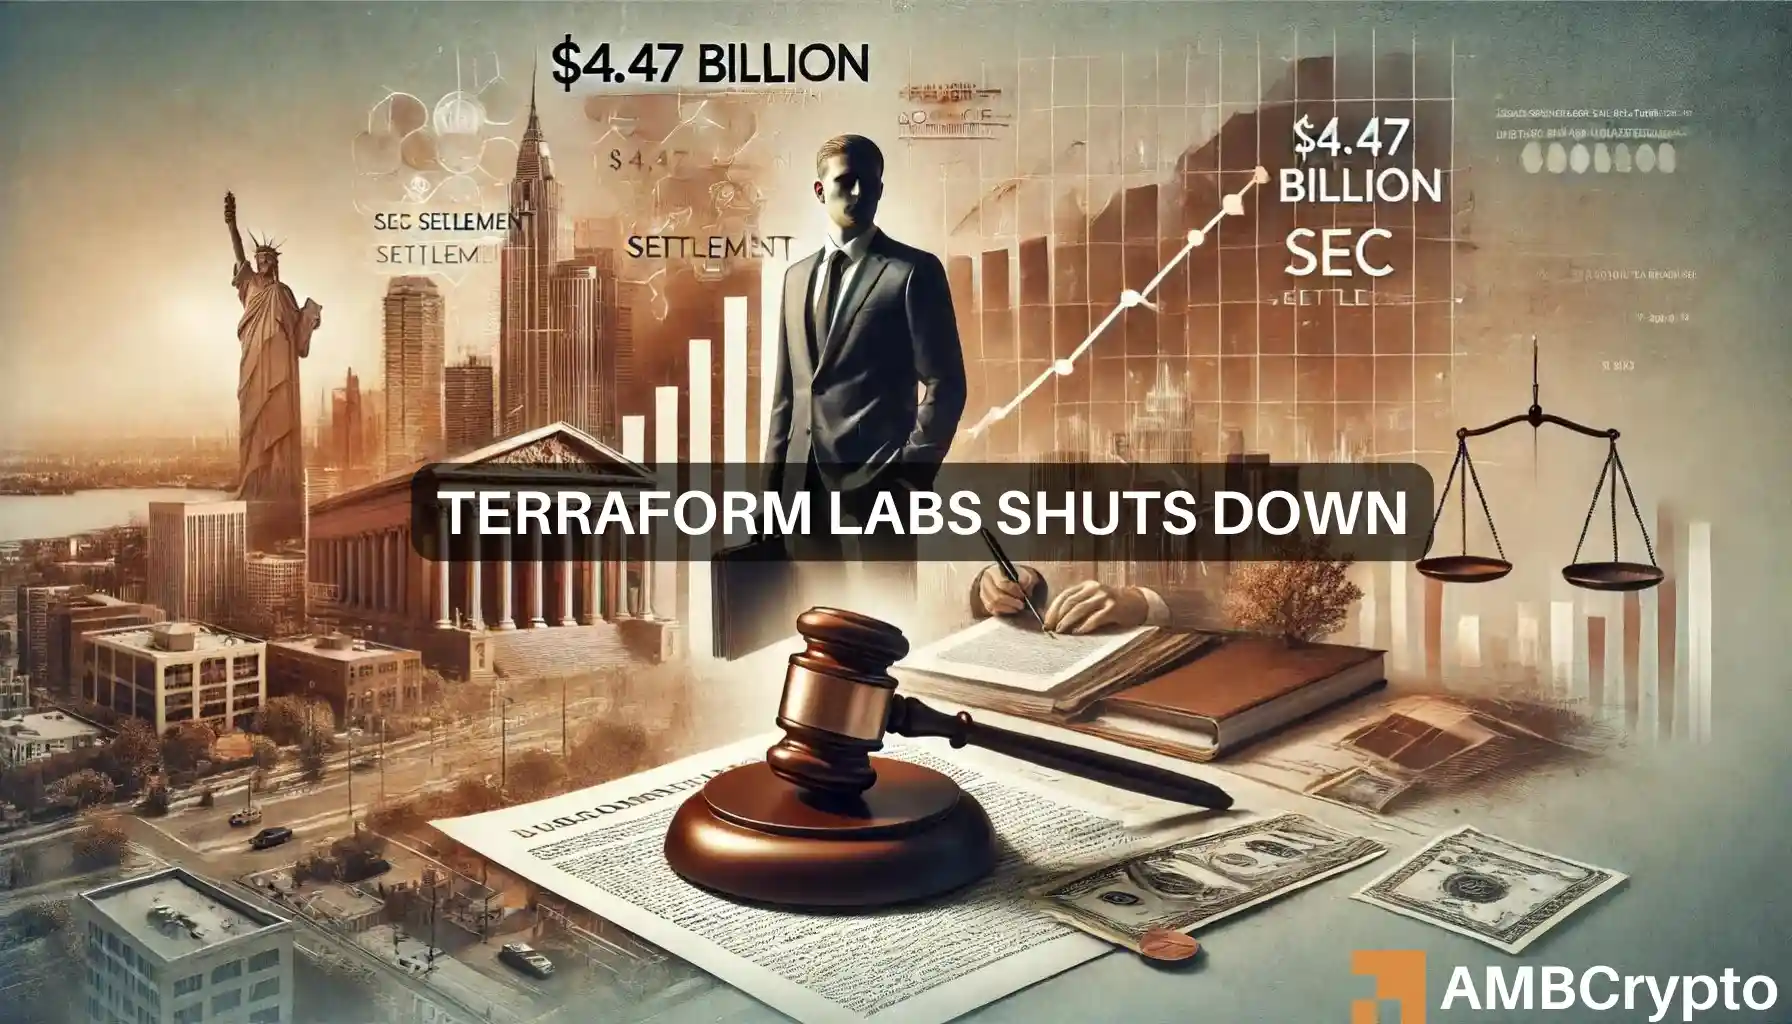 Do Kwon’s fallout: Terraform Labs to shut down after $4.47B penalty